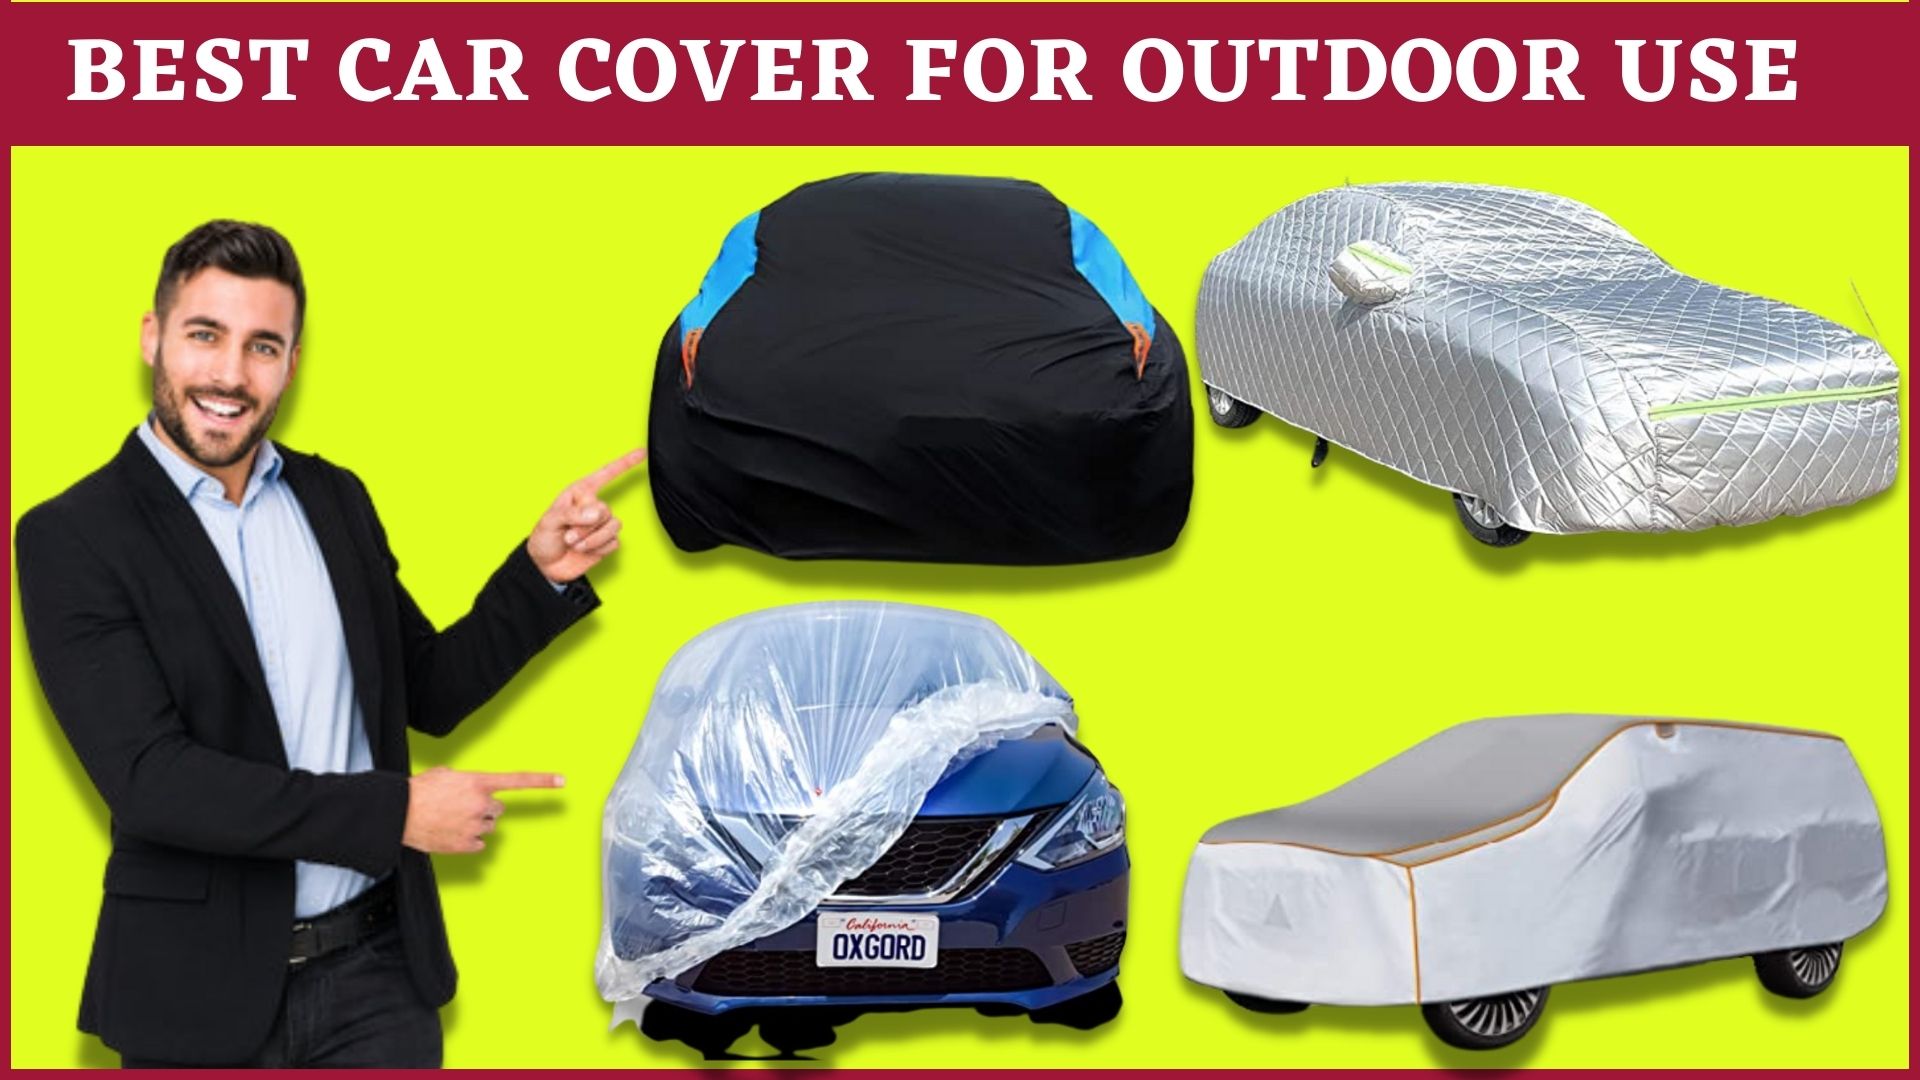 Best Car Cover For Outdoor Use